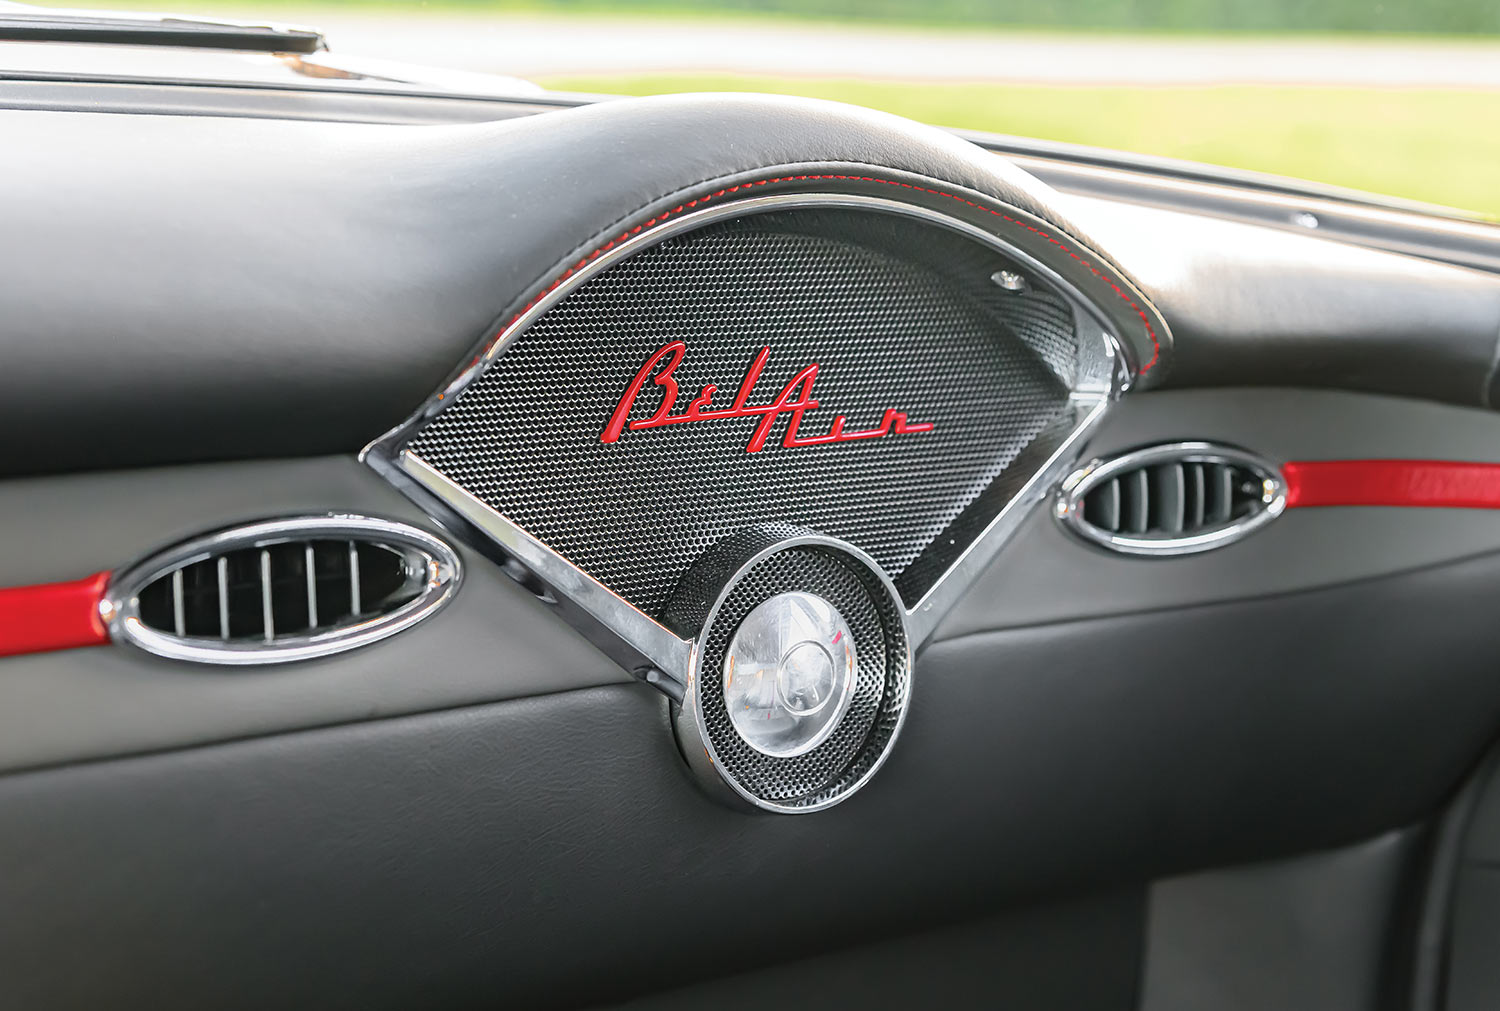 the LS V-10's dashboard vents and Bel Air logo